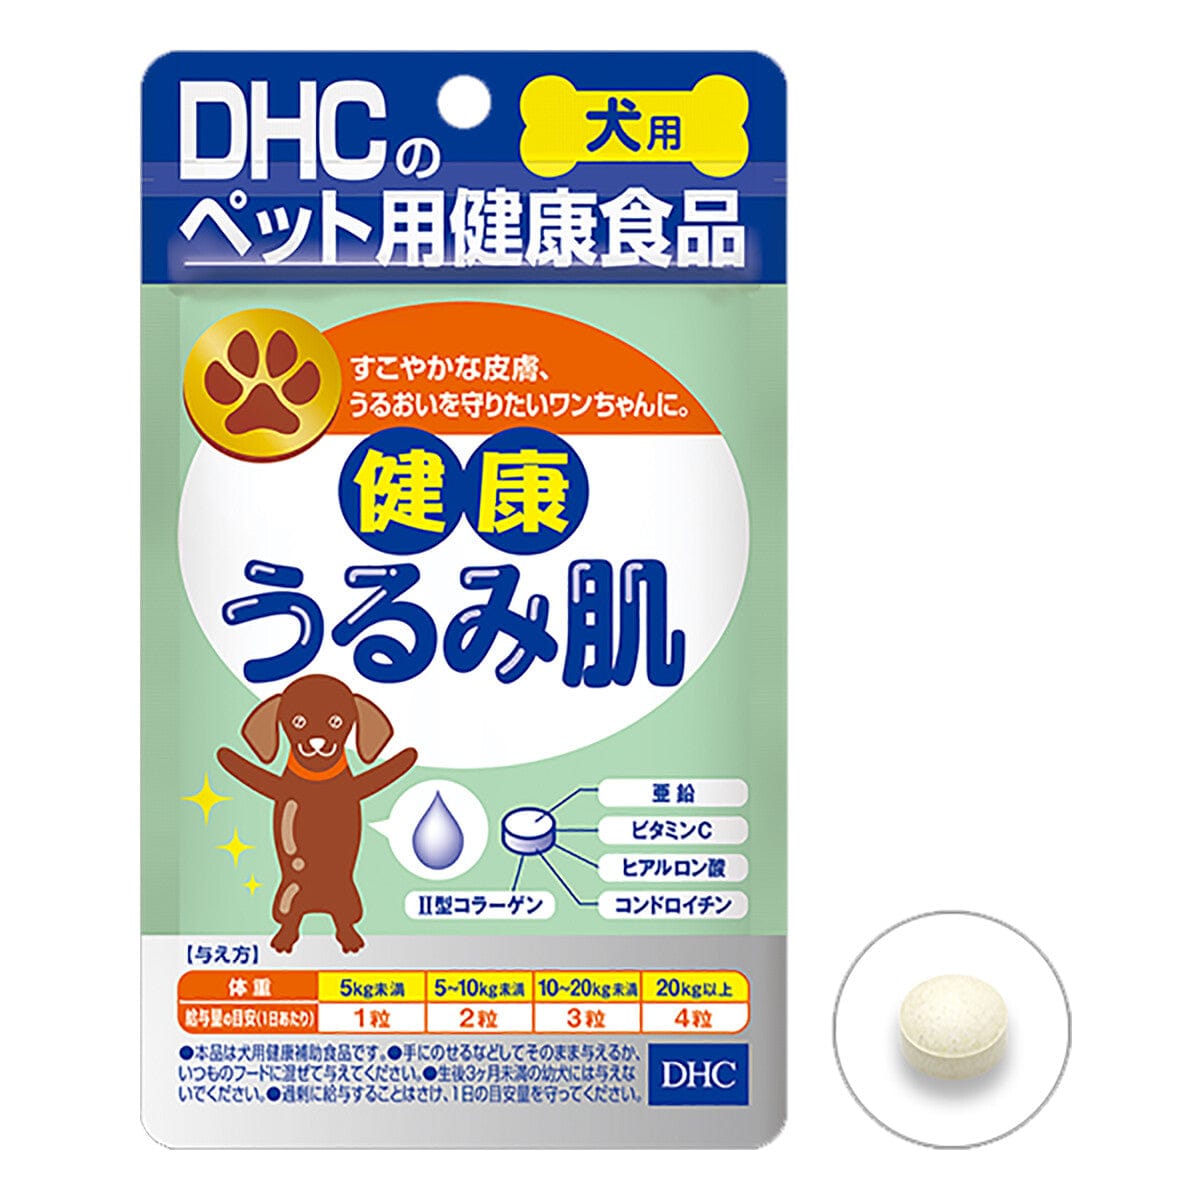 DHC - Moisturizing Skin Health Food Supplement for Pet Dogs (60 Tablets) -  Pet Dog Supplements  Durio.sg